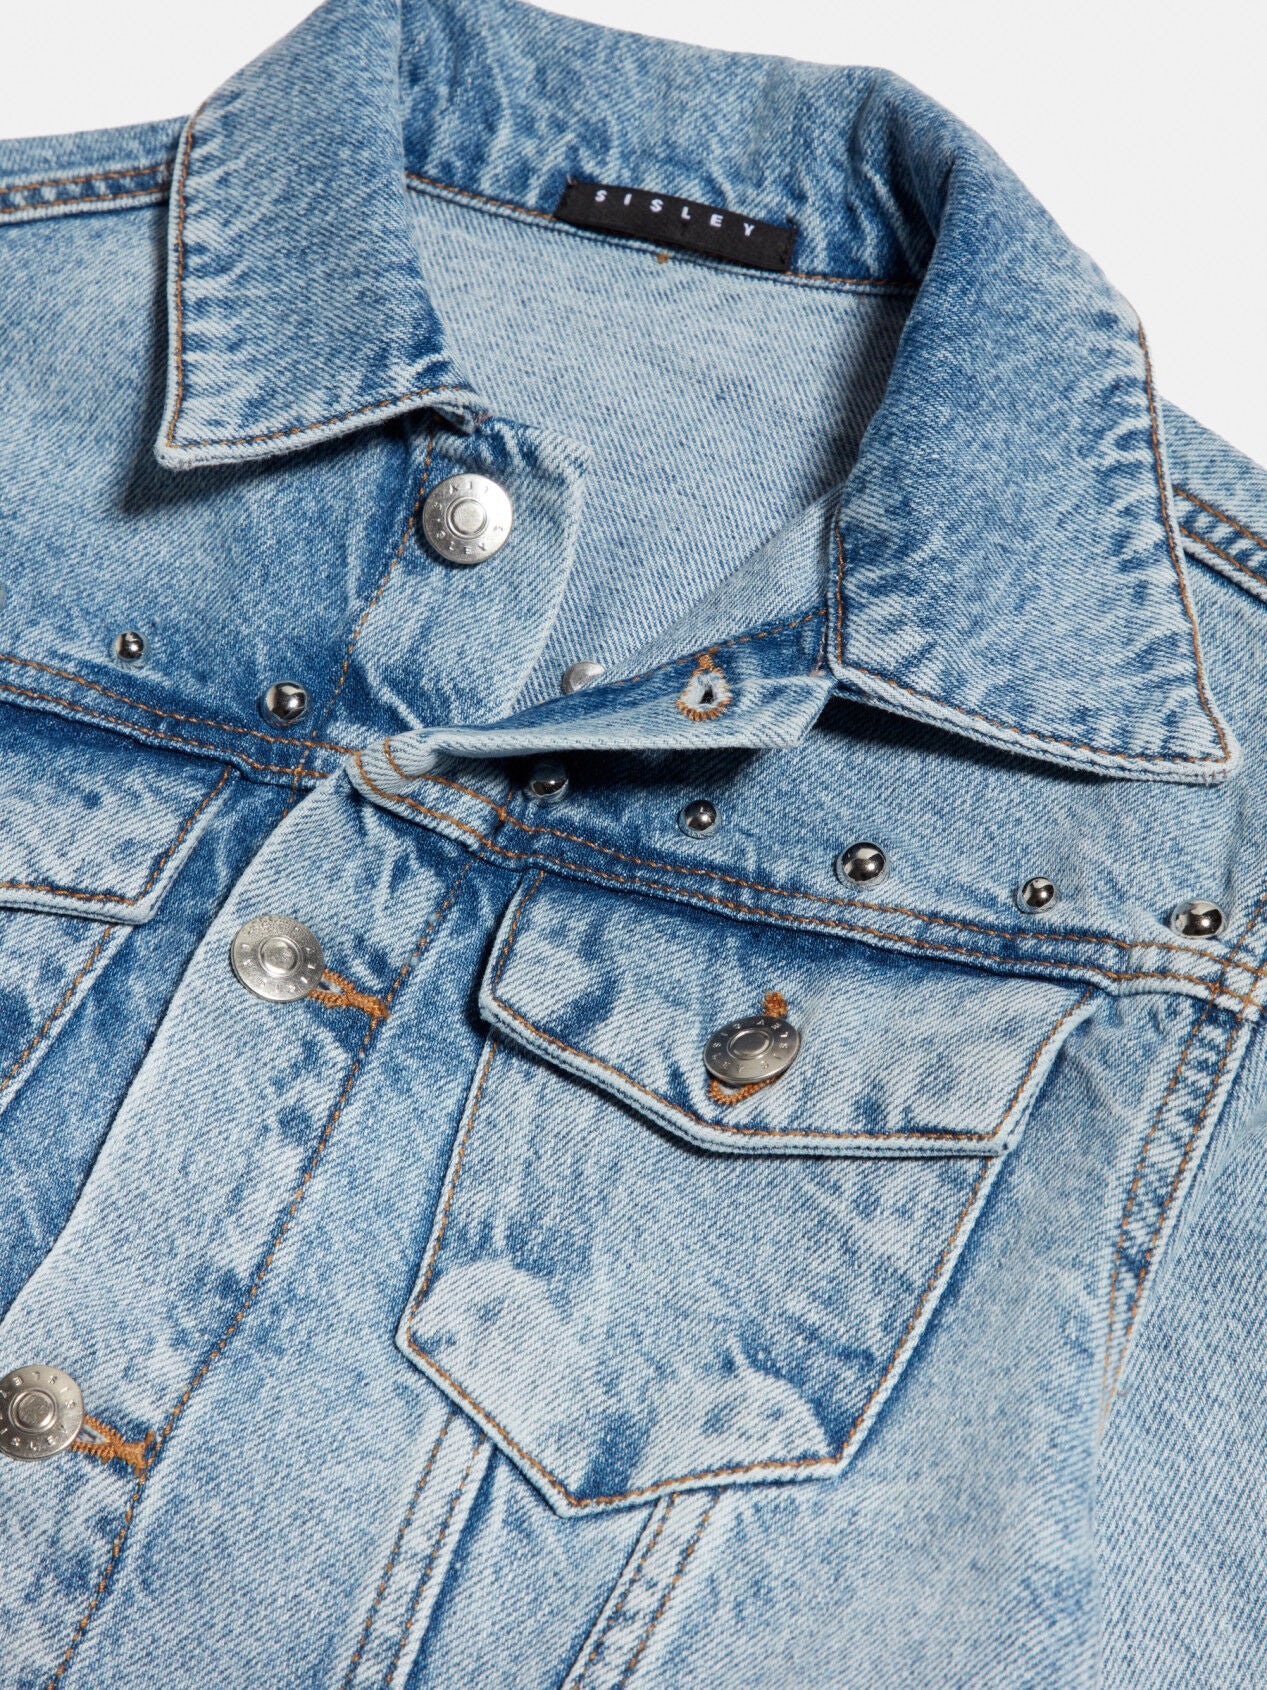 Jean Jacket With Studs